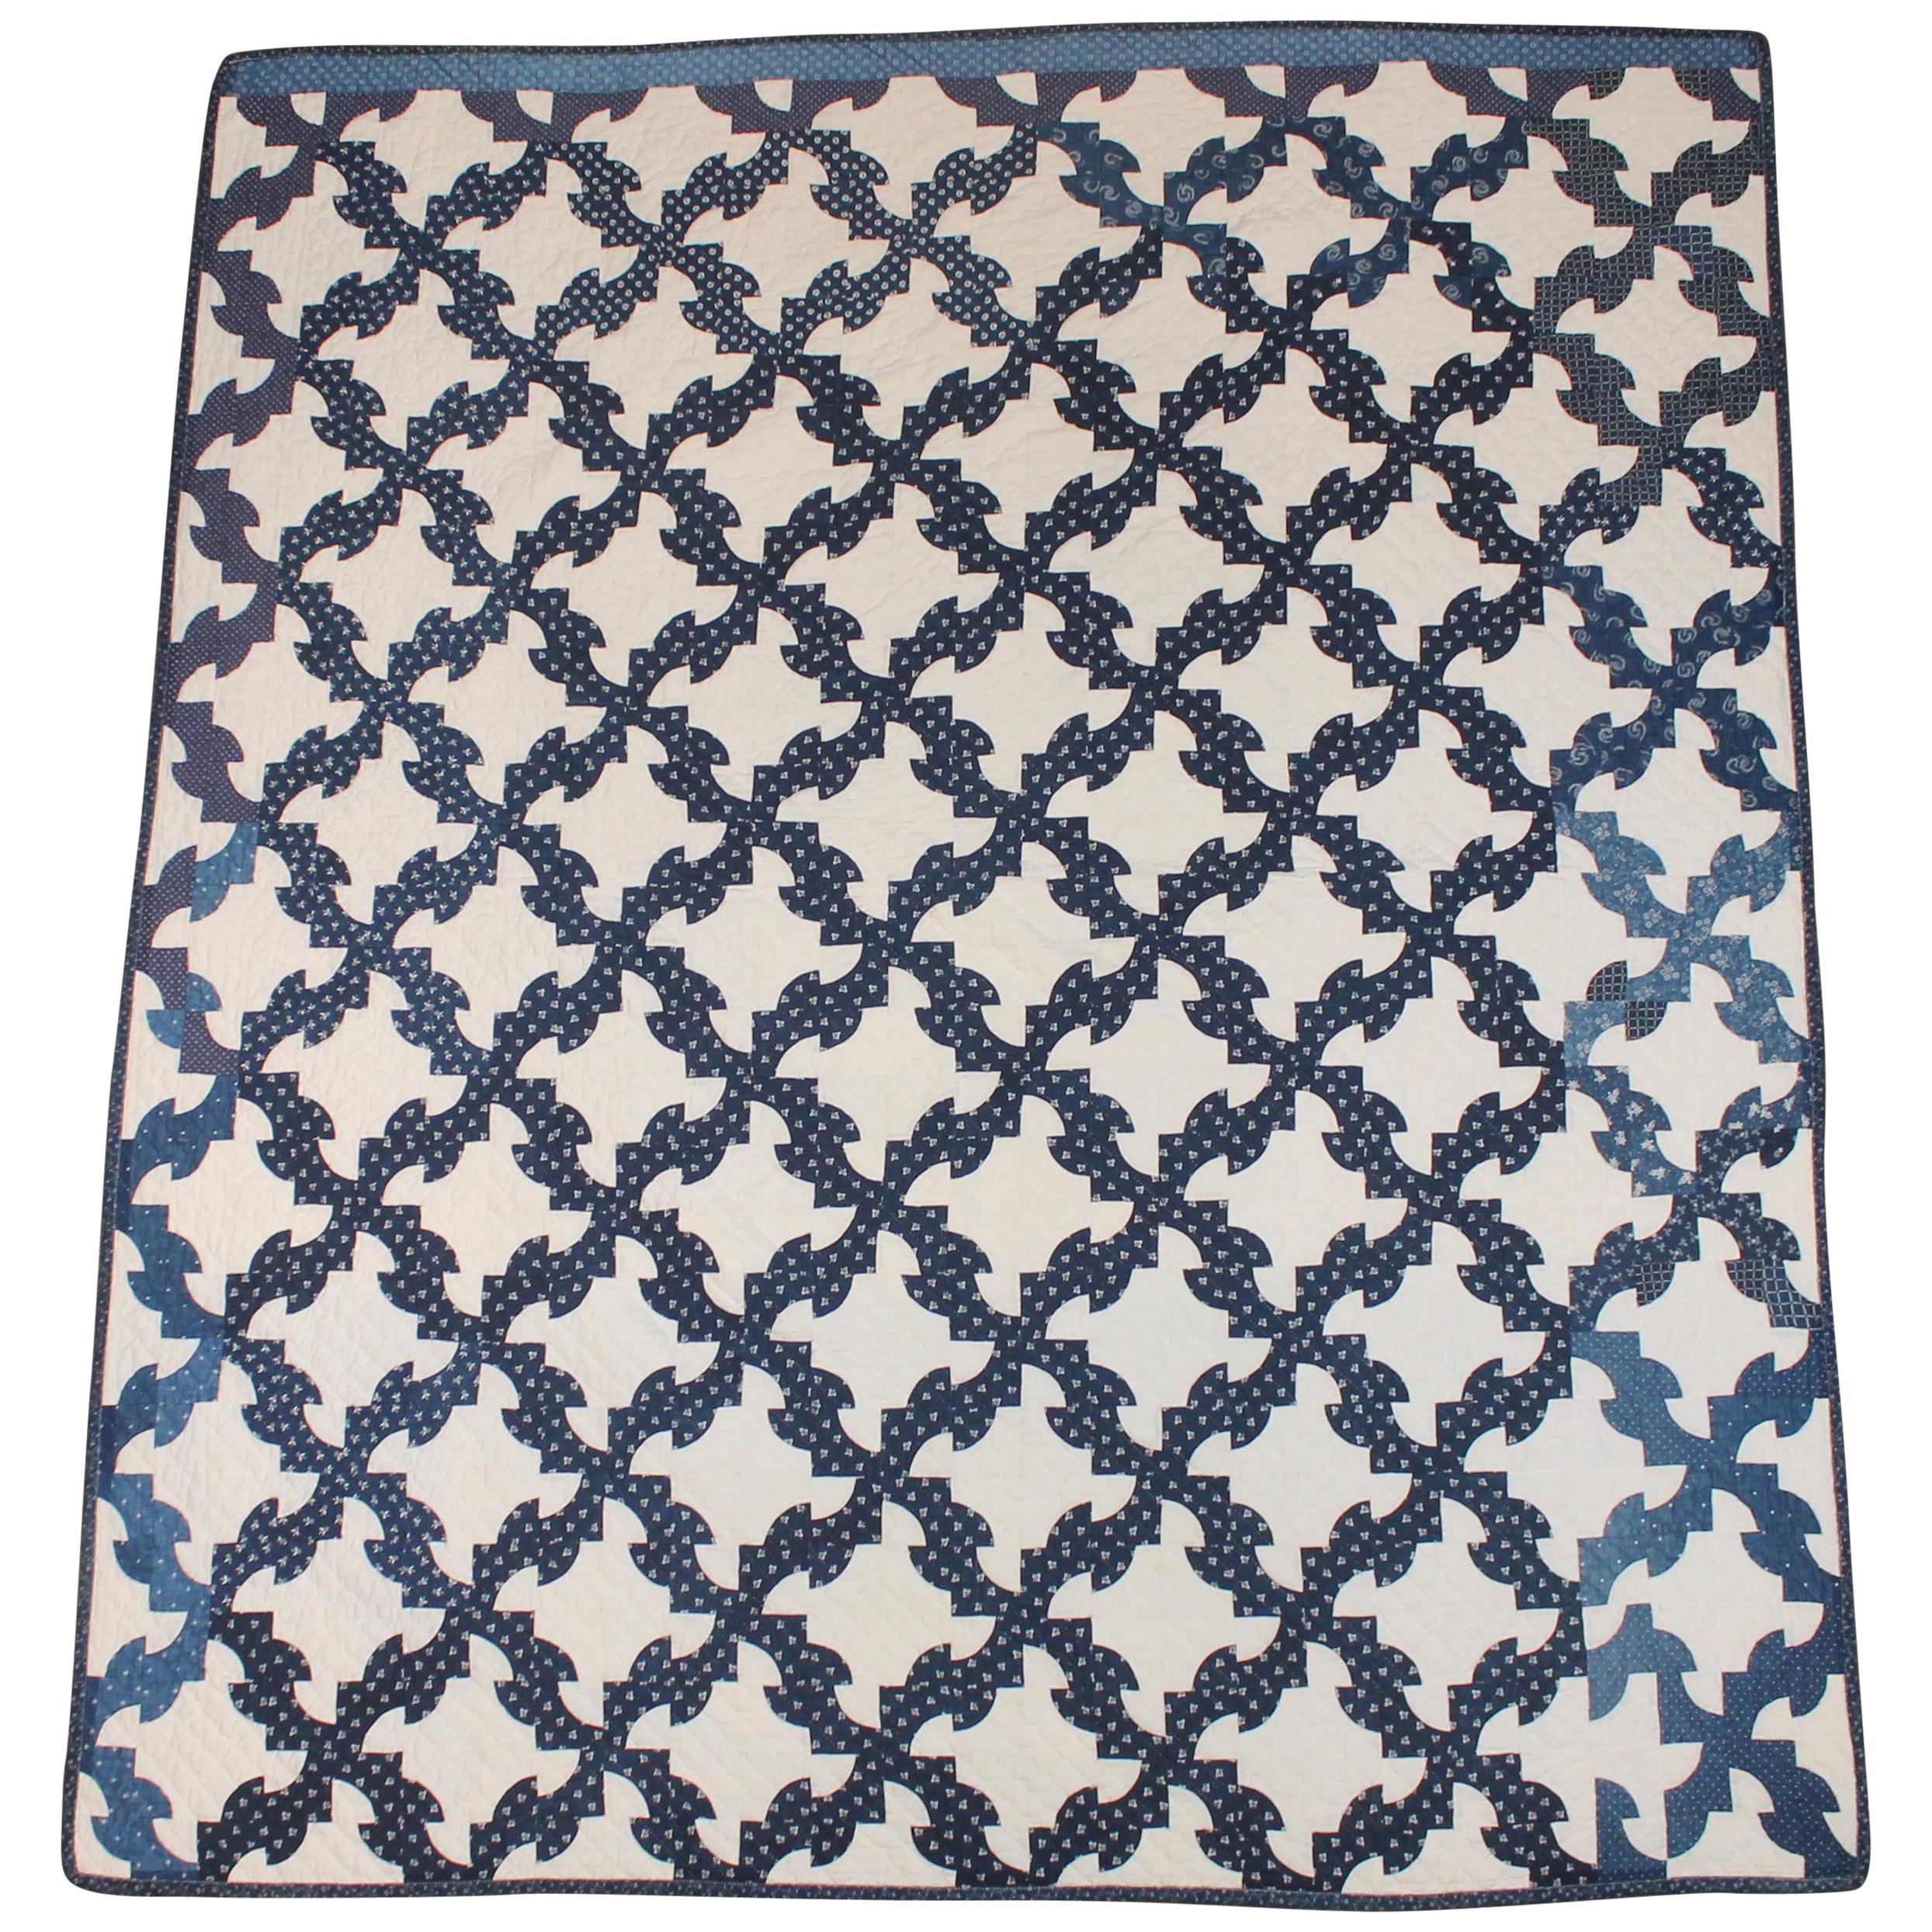 Antique Quilt Blue and White Drunkers/Drunkard's Path